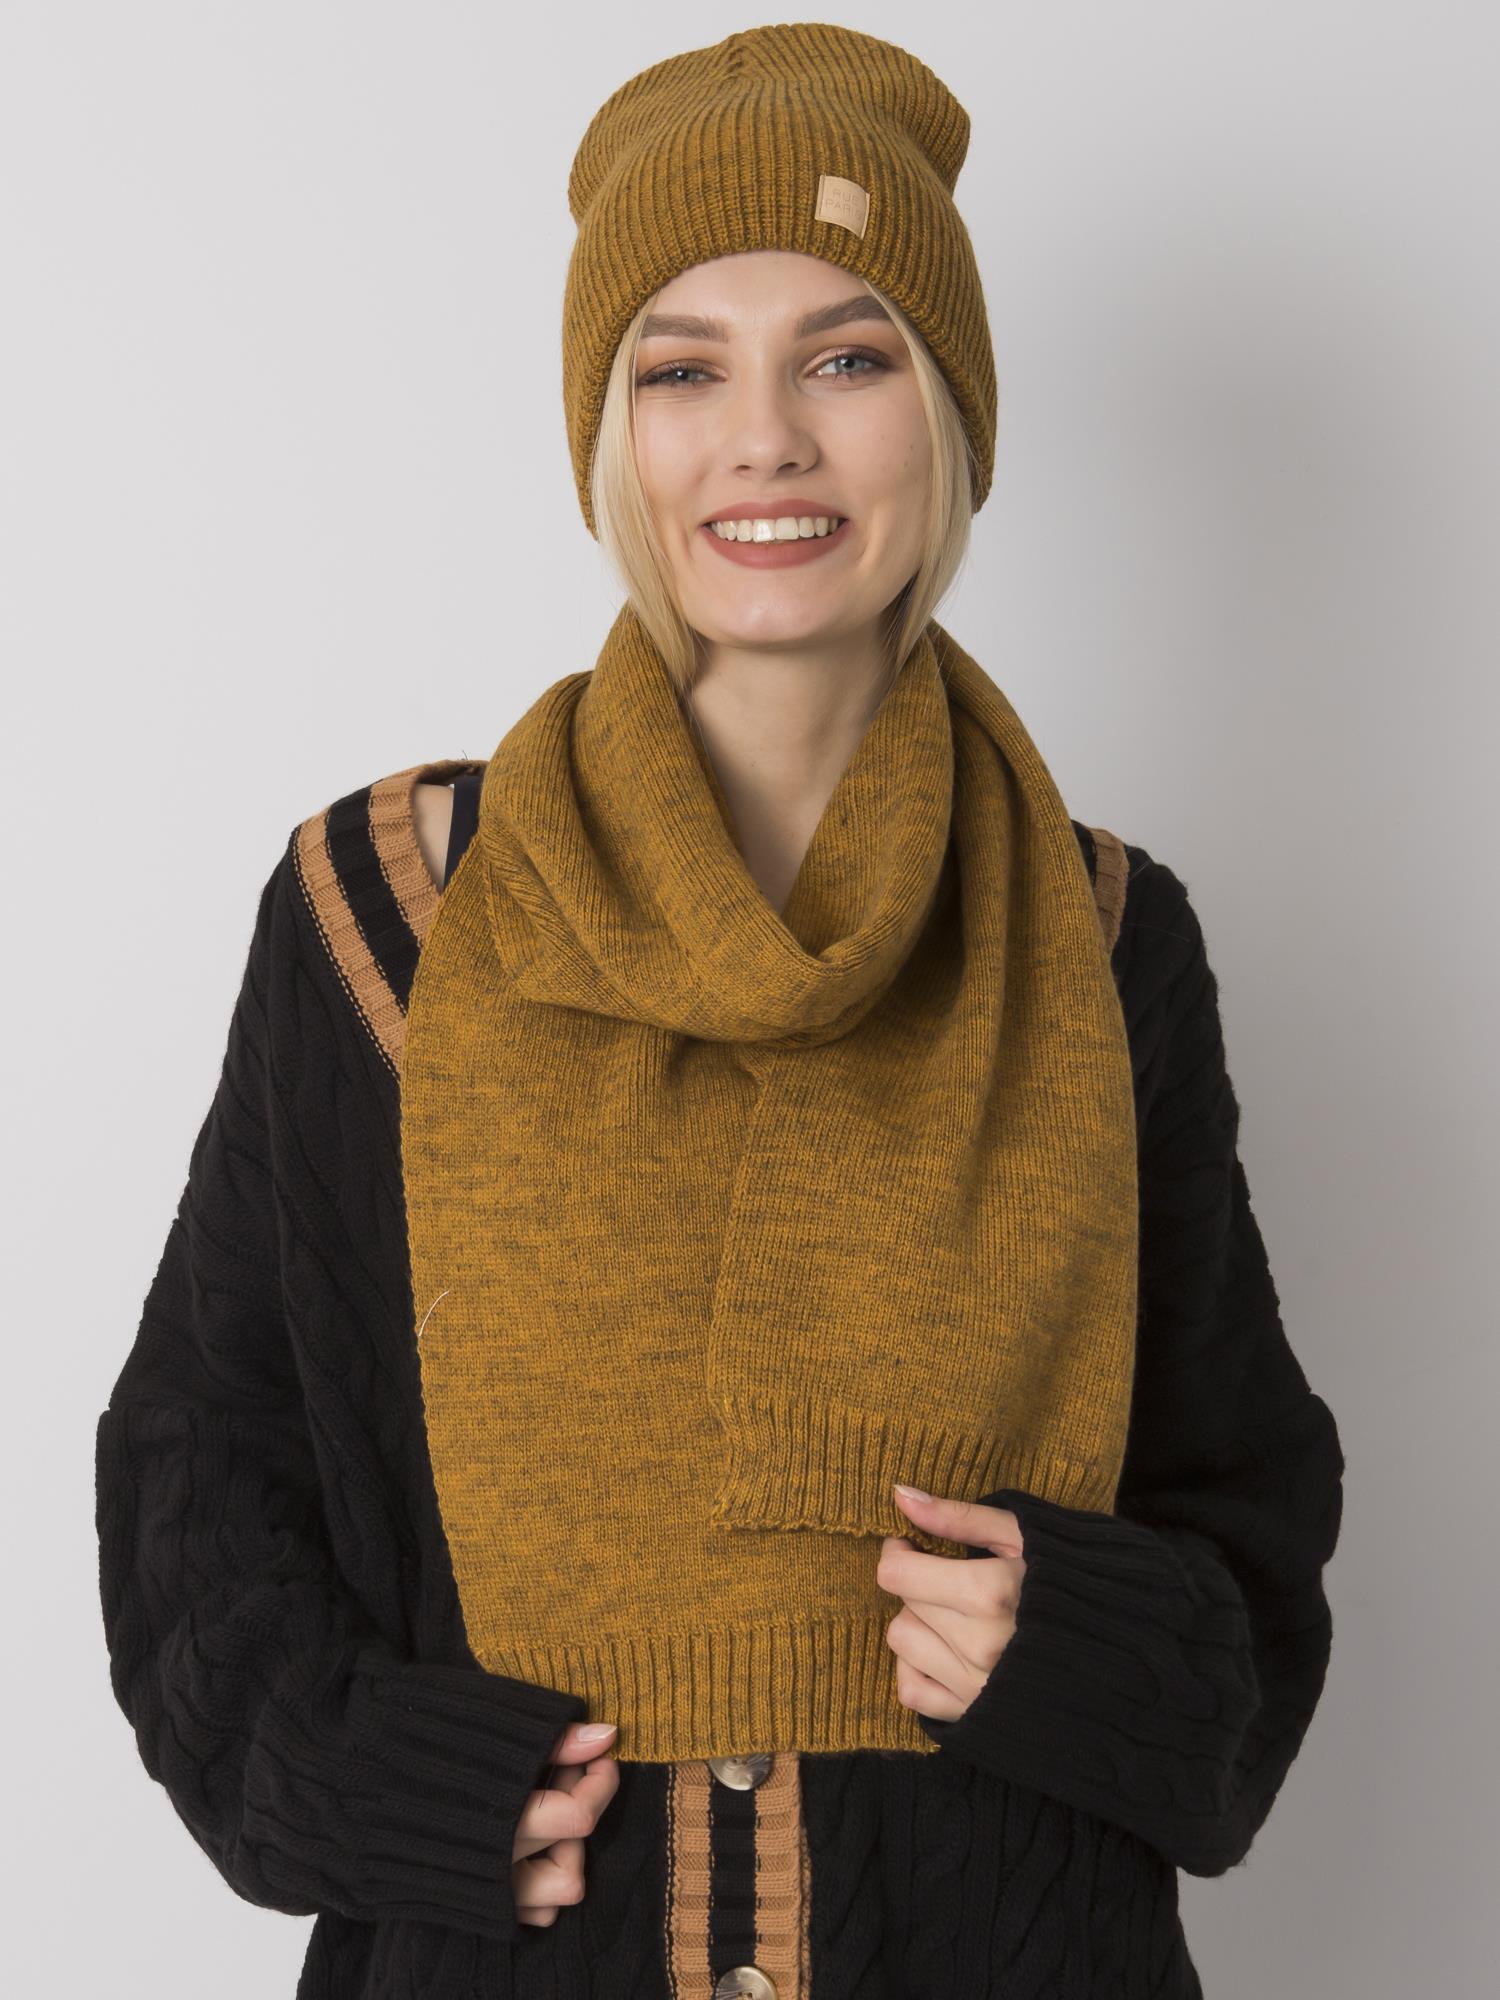 Knitted mustard set for the winter RUE PARIS